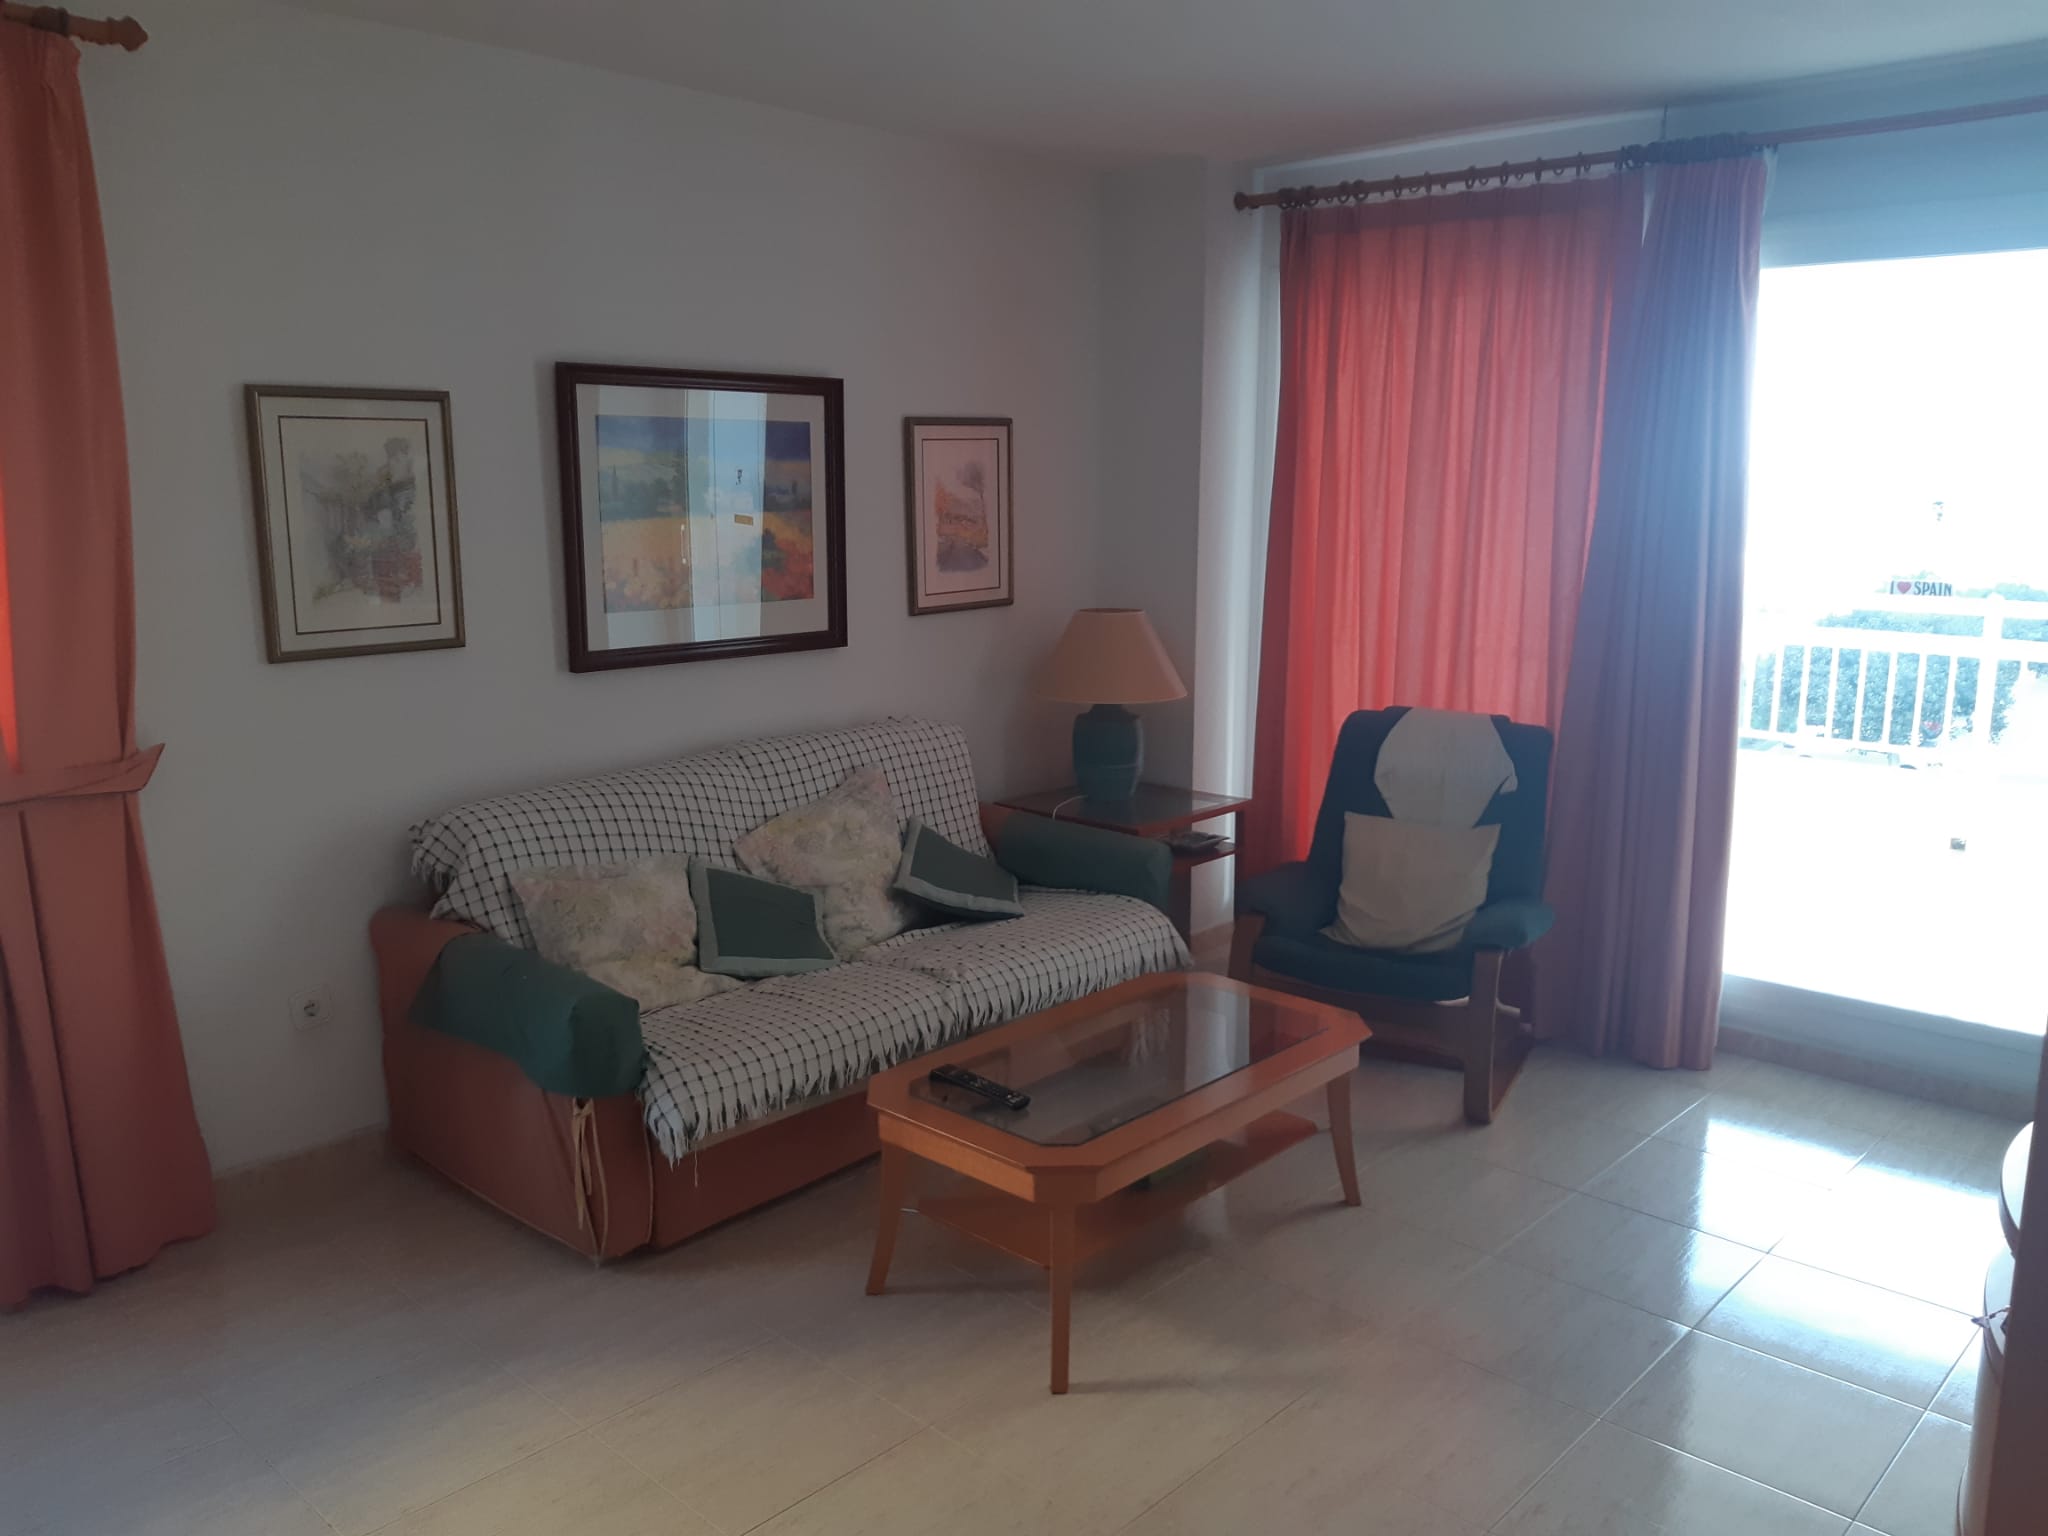 TWO-BEDROOM APARTMENT WITH SEA VIEWS IN CALPE